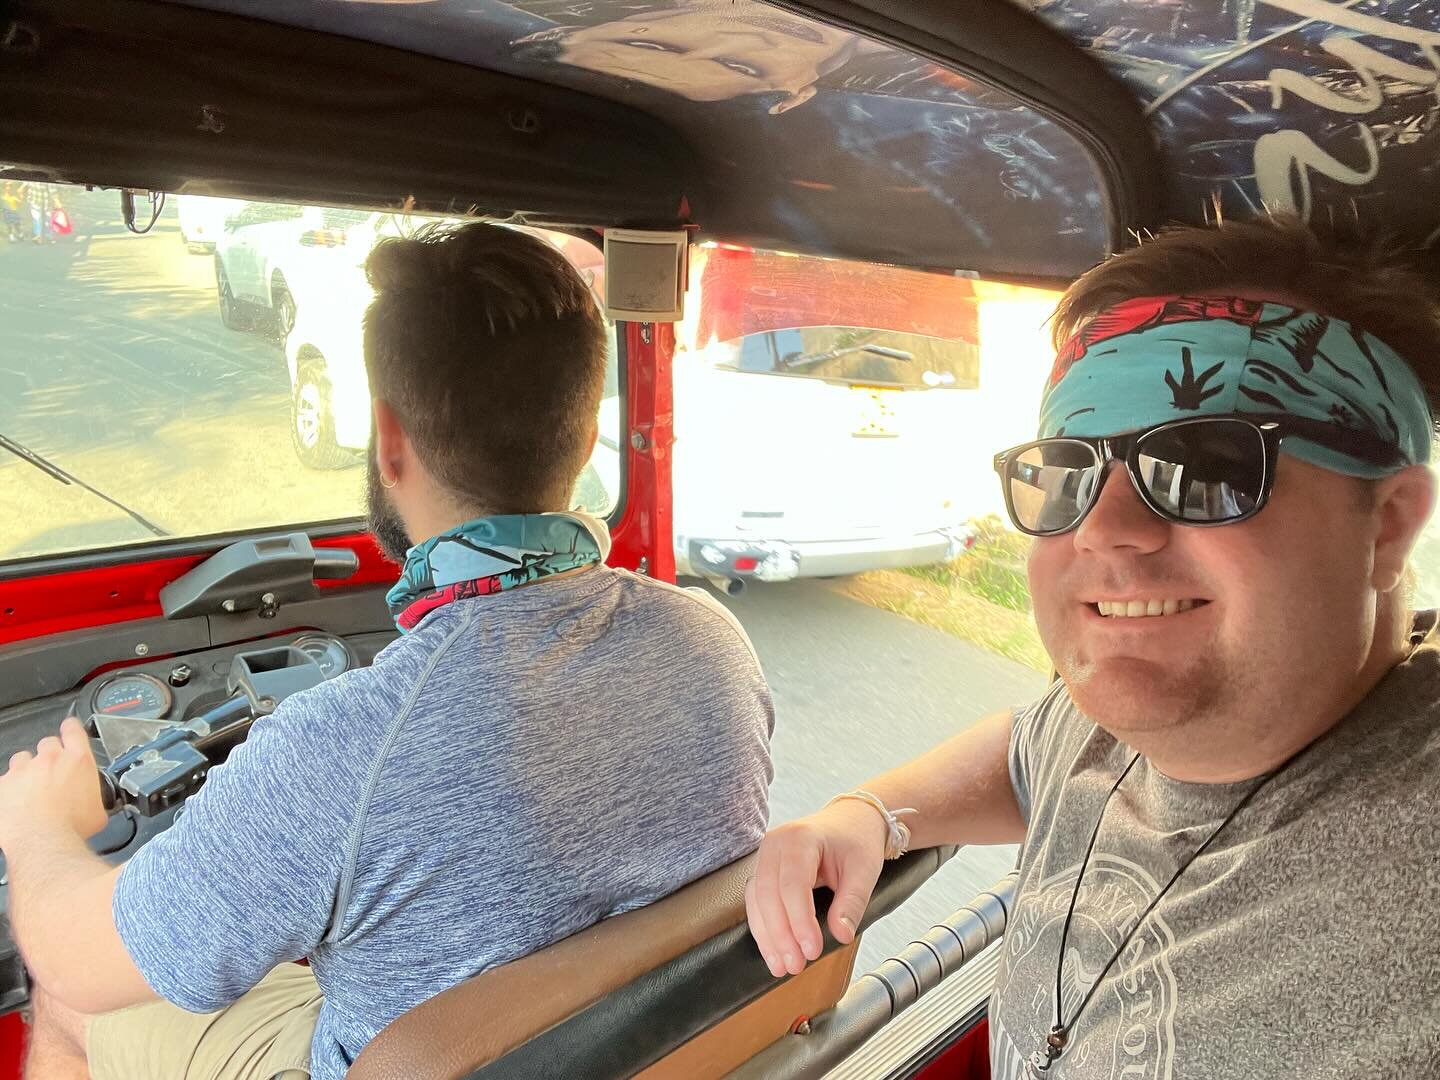 Two brothers on the open road! #srilanka #rickshawrun #rickshawrunsrilanka @rickshawrunofficial @theadventurists #travel #adventure - Stay tuned for a special season 4 of the Attempt Adventure podcast following our adventures in Sri Lanka! 🇱🇰